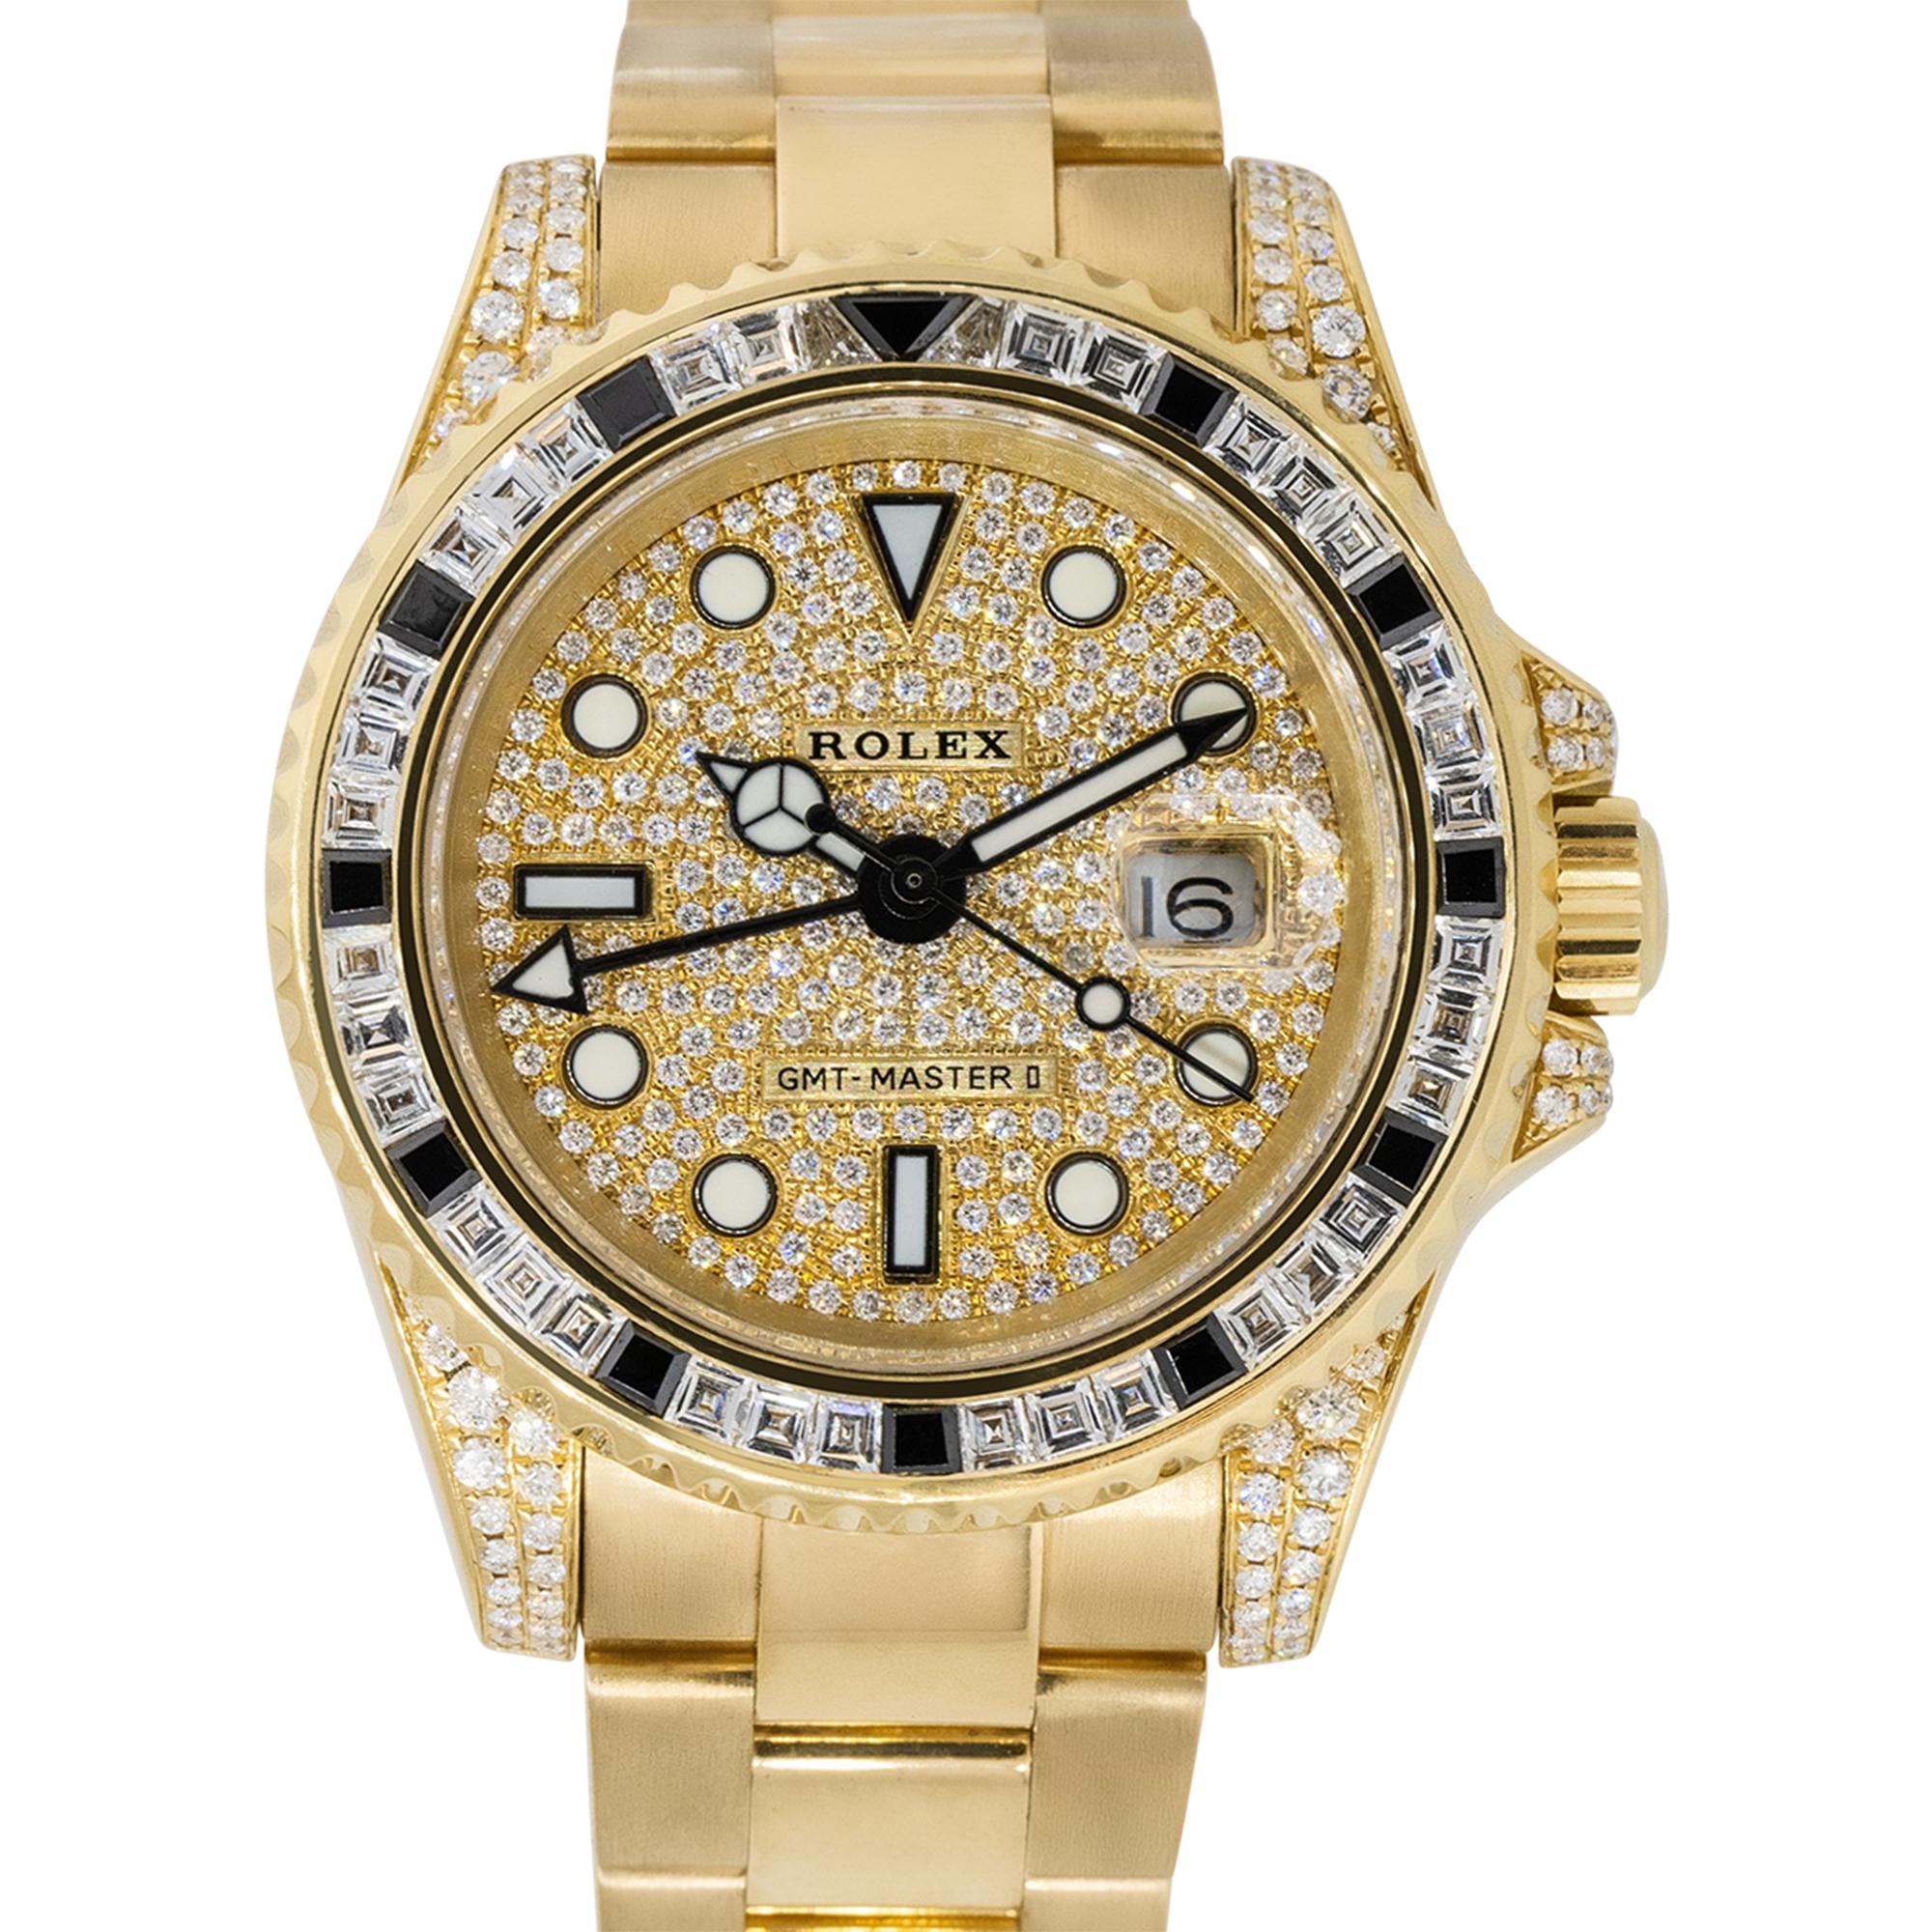 Brand: Rolex
Case Material: 18k Yellow Gold
Case Diameter: 40mm
Crystal: Sapphire Crystal
Bezel: 18k Yellow Gold bezel with Diamonds
Dial: Diamond pave dial with black hands and luminescent hour markers
Bracelet: 18k Yellow Gold Oyster